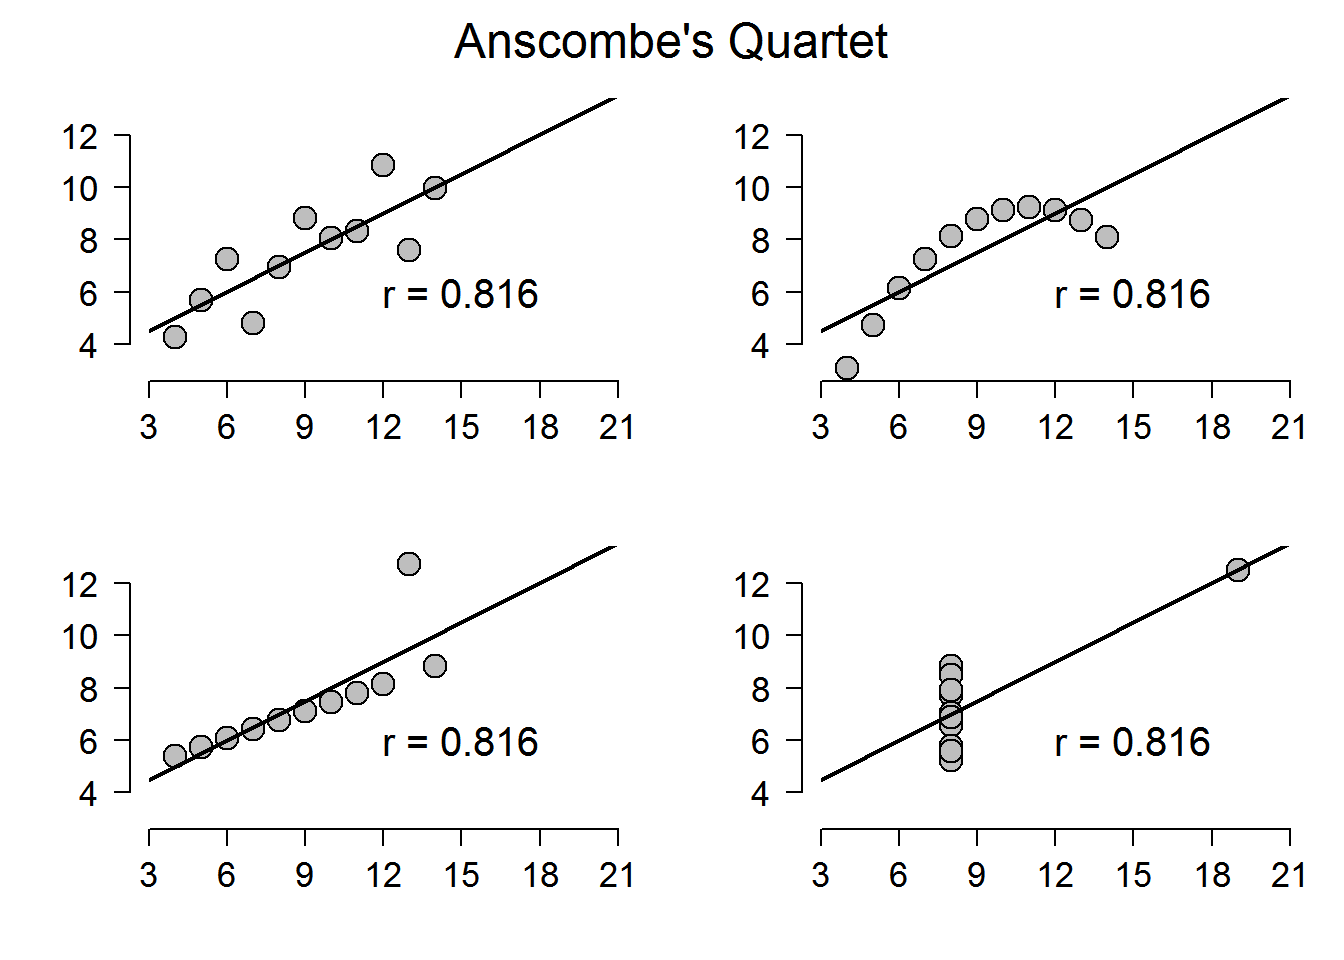 All four of Anscombe's plots. Taken from https://www.shinyapps.org/apps/RGraphCompendium/index.php#anscombes-quartet